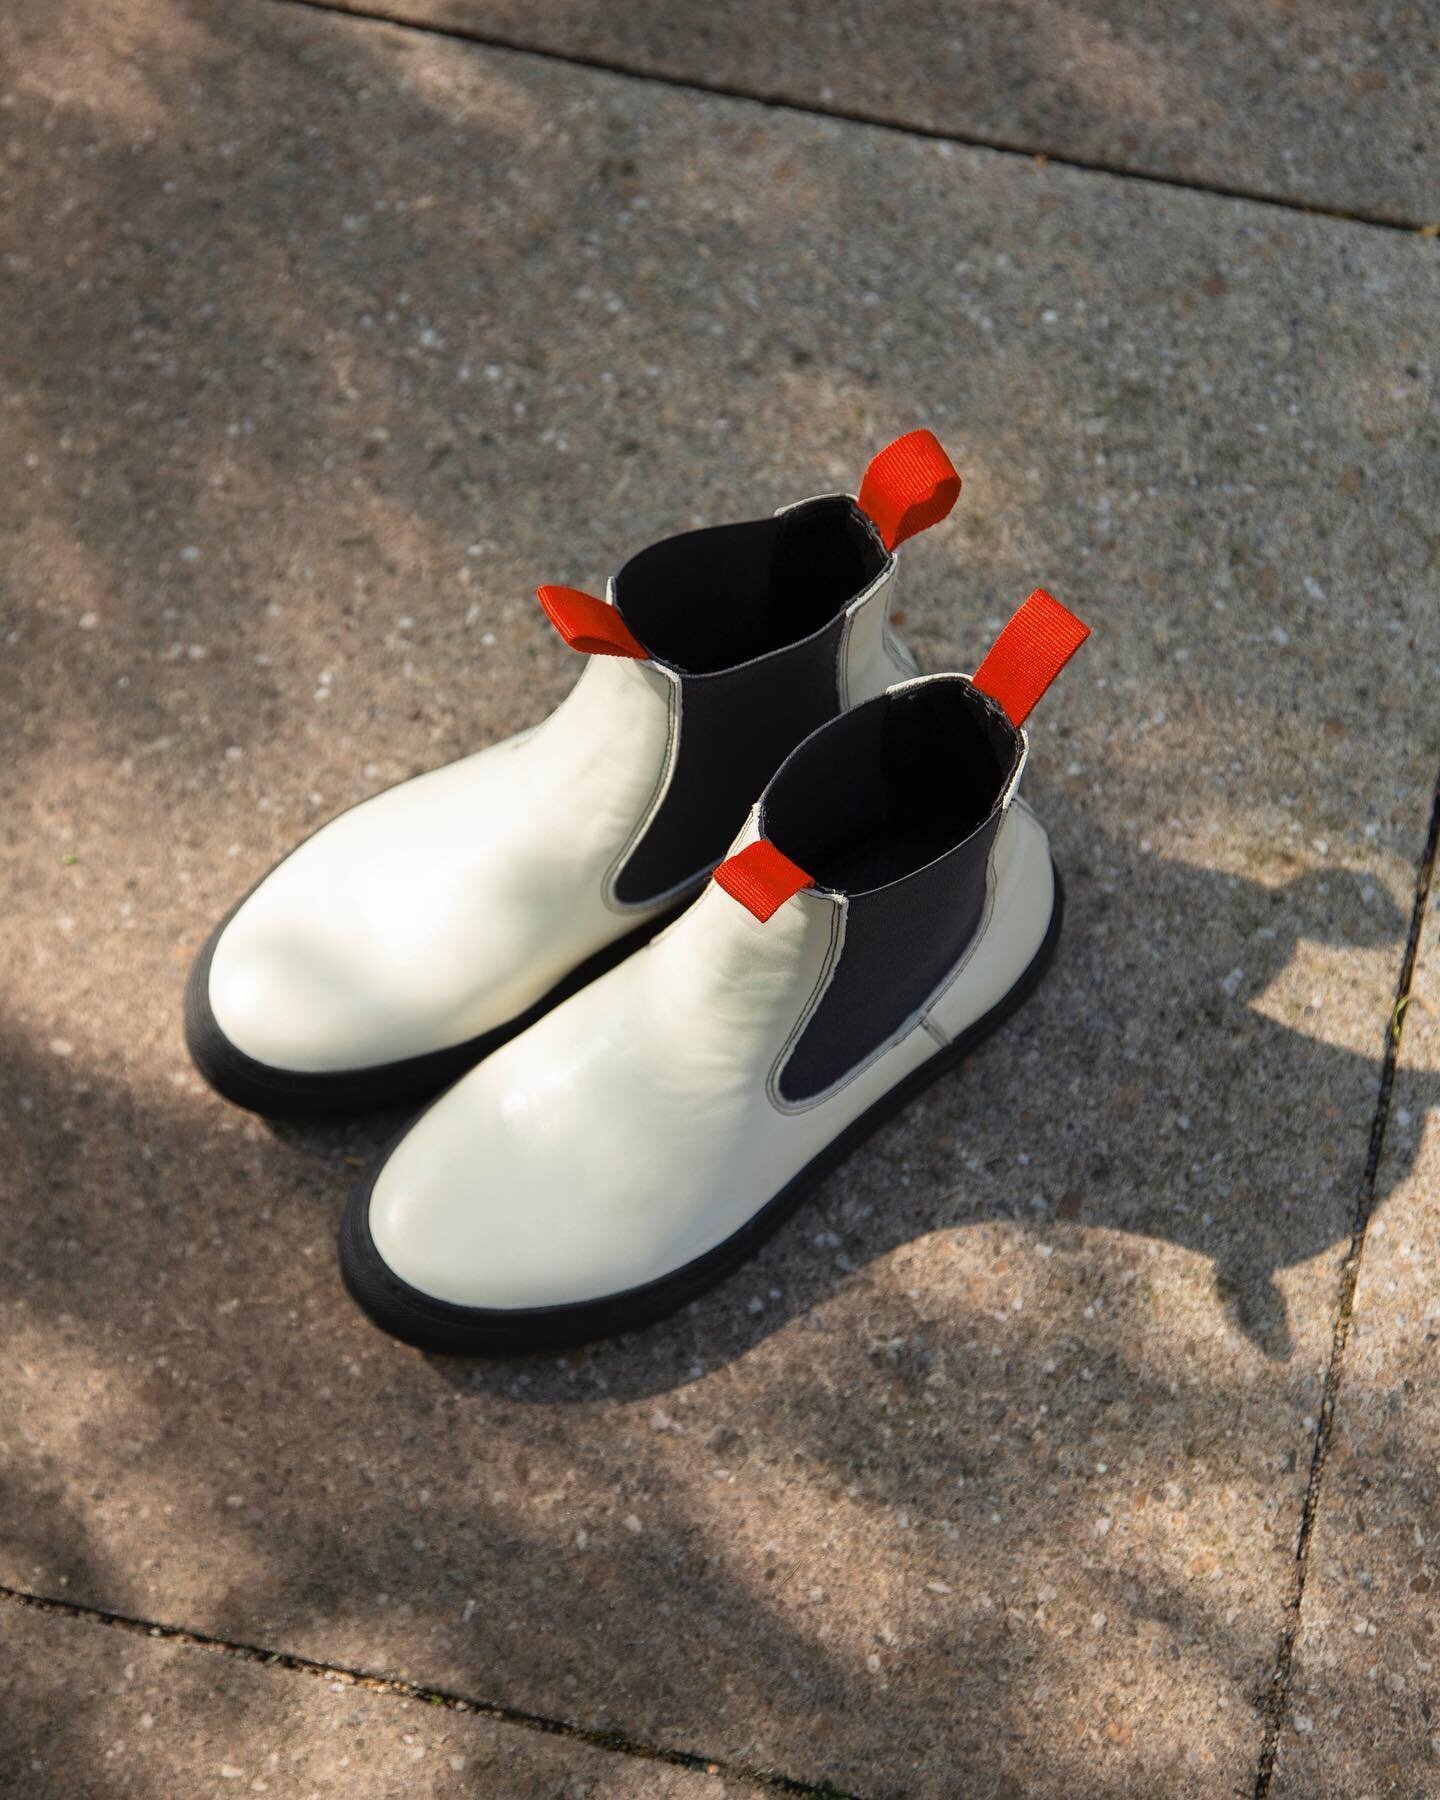 FARO / One of the most anticipated pieces for fall is this pair of @sofiedhoore&rsquo;s Faro boots. Crafted from a soft, pale leather, and finished with bright red tabs. It&rsquo;s a modern yet timeless take on a chelsea boot style. 
#jonesarnhem #jo